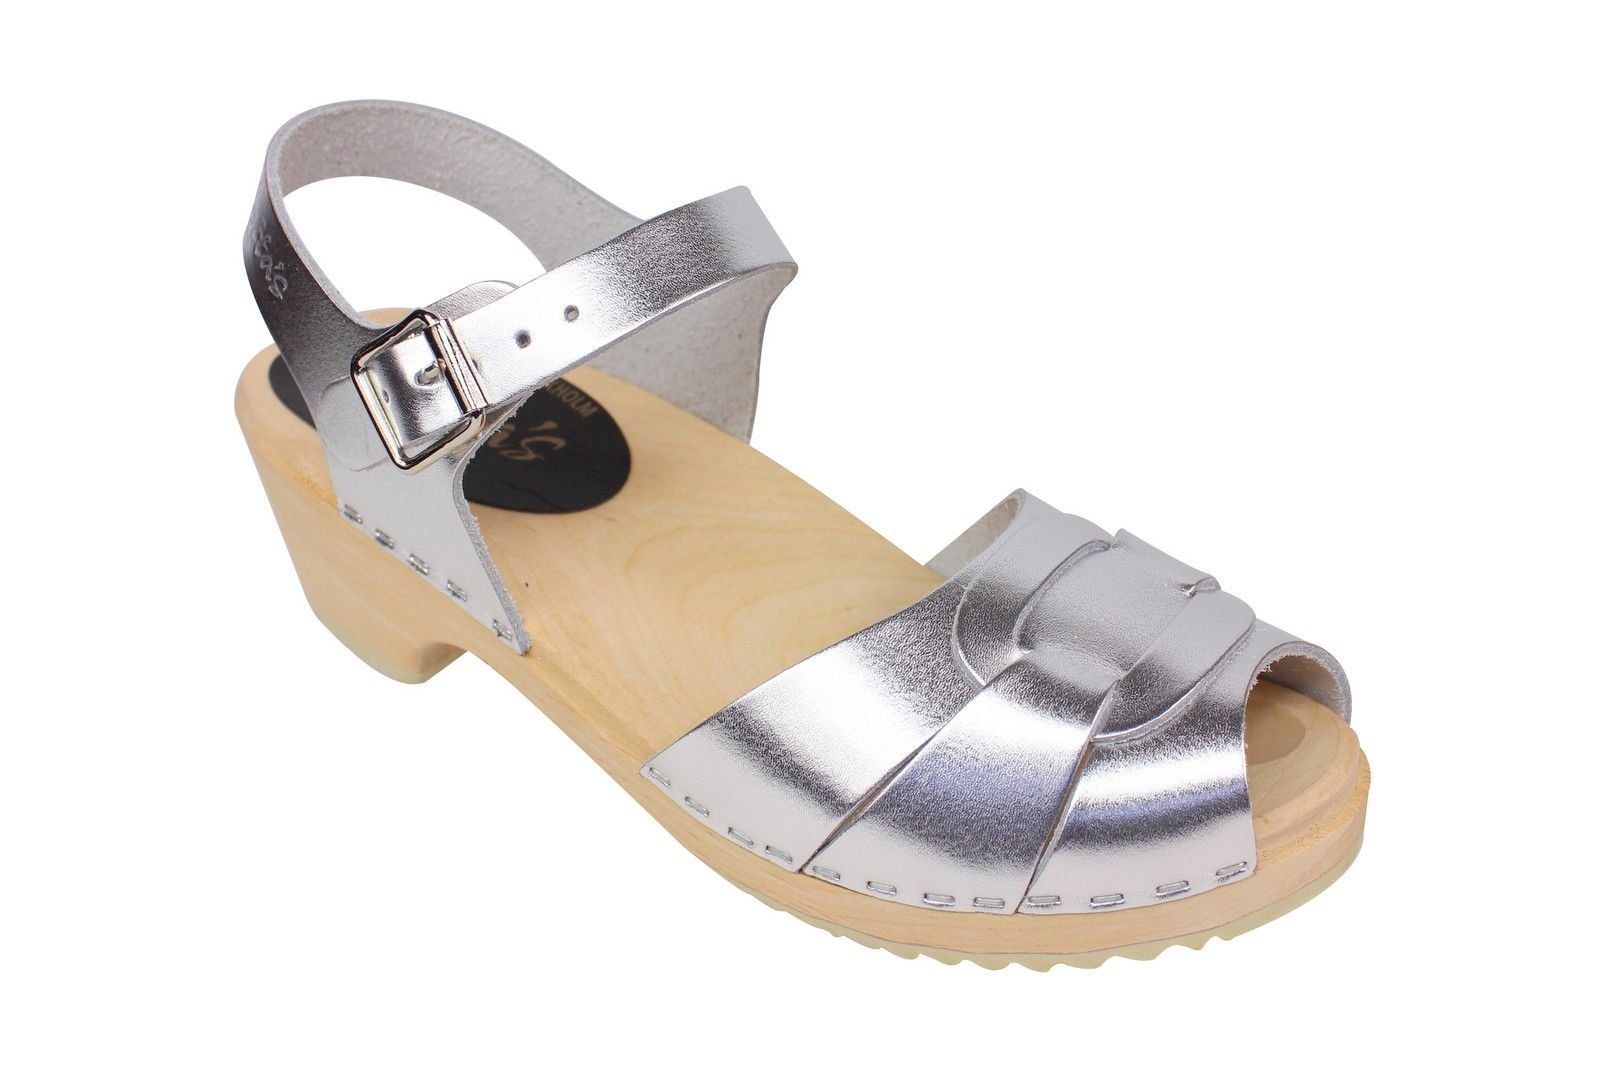 Lotta From Stockholm Low Heel Peep Toe in Silver Leather